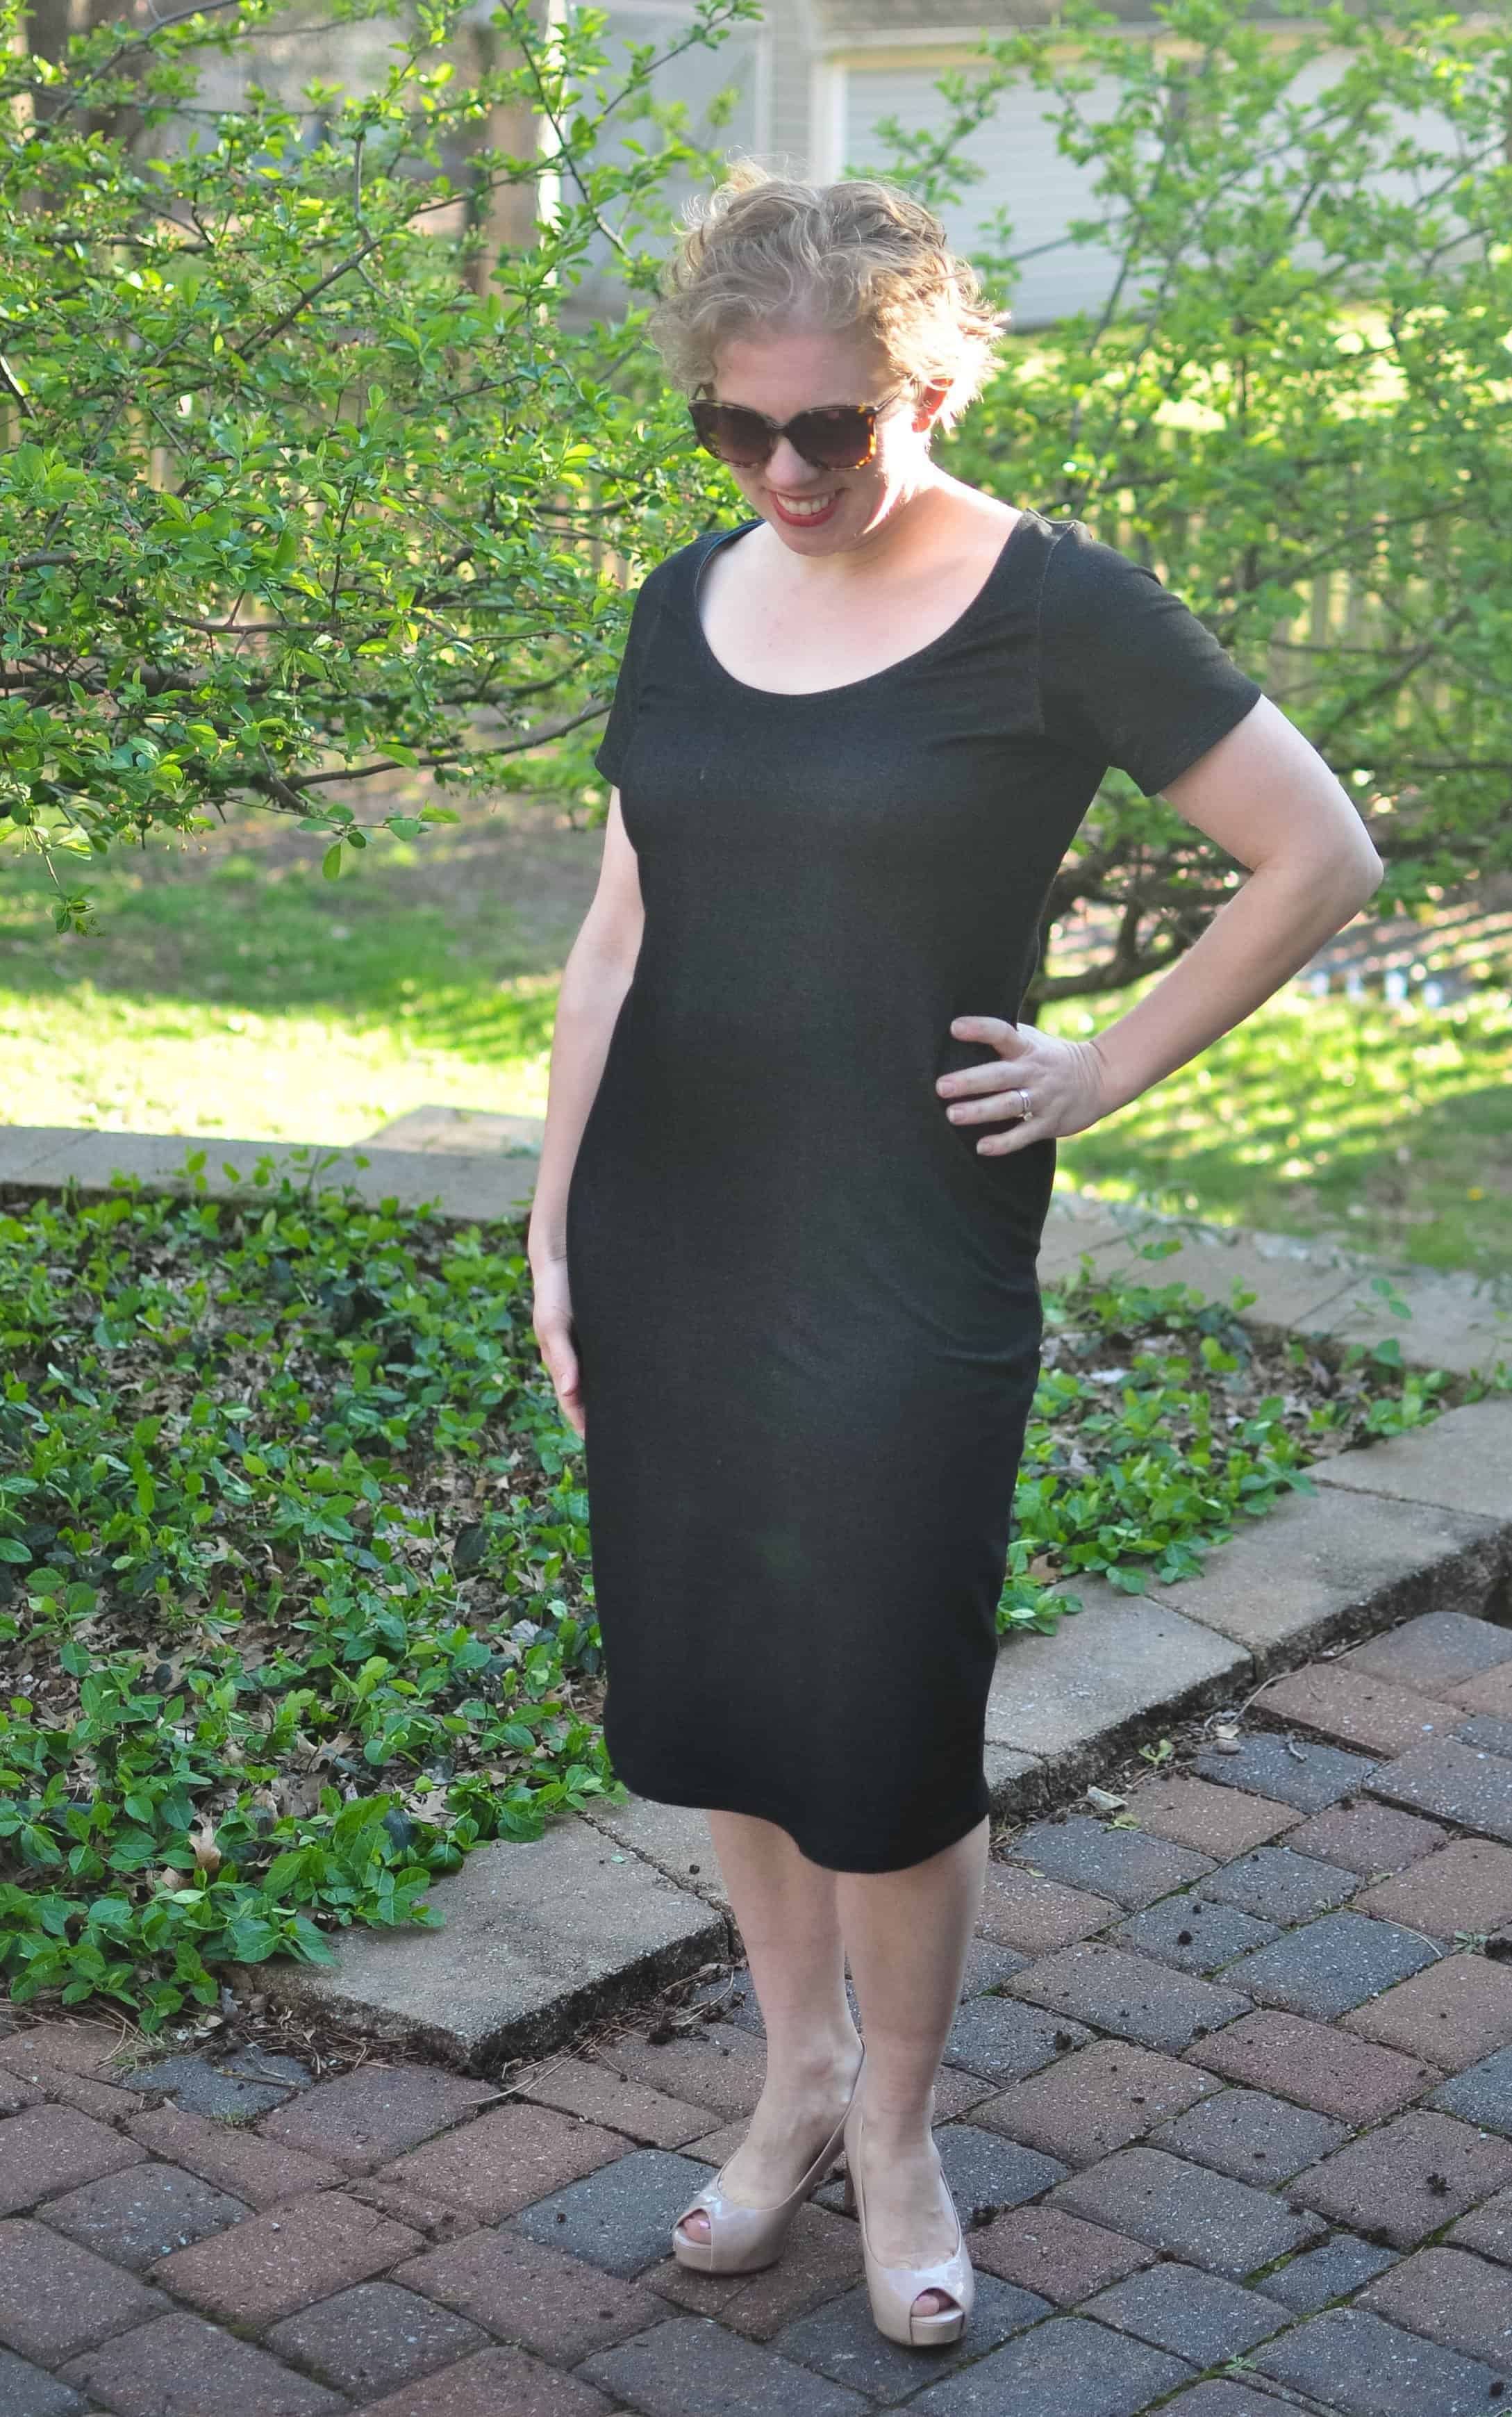 Ladies top and sheath dress patterns by Love Notions.